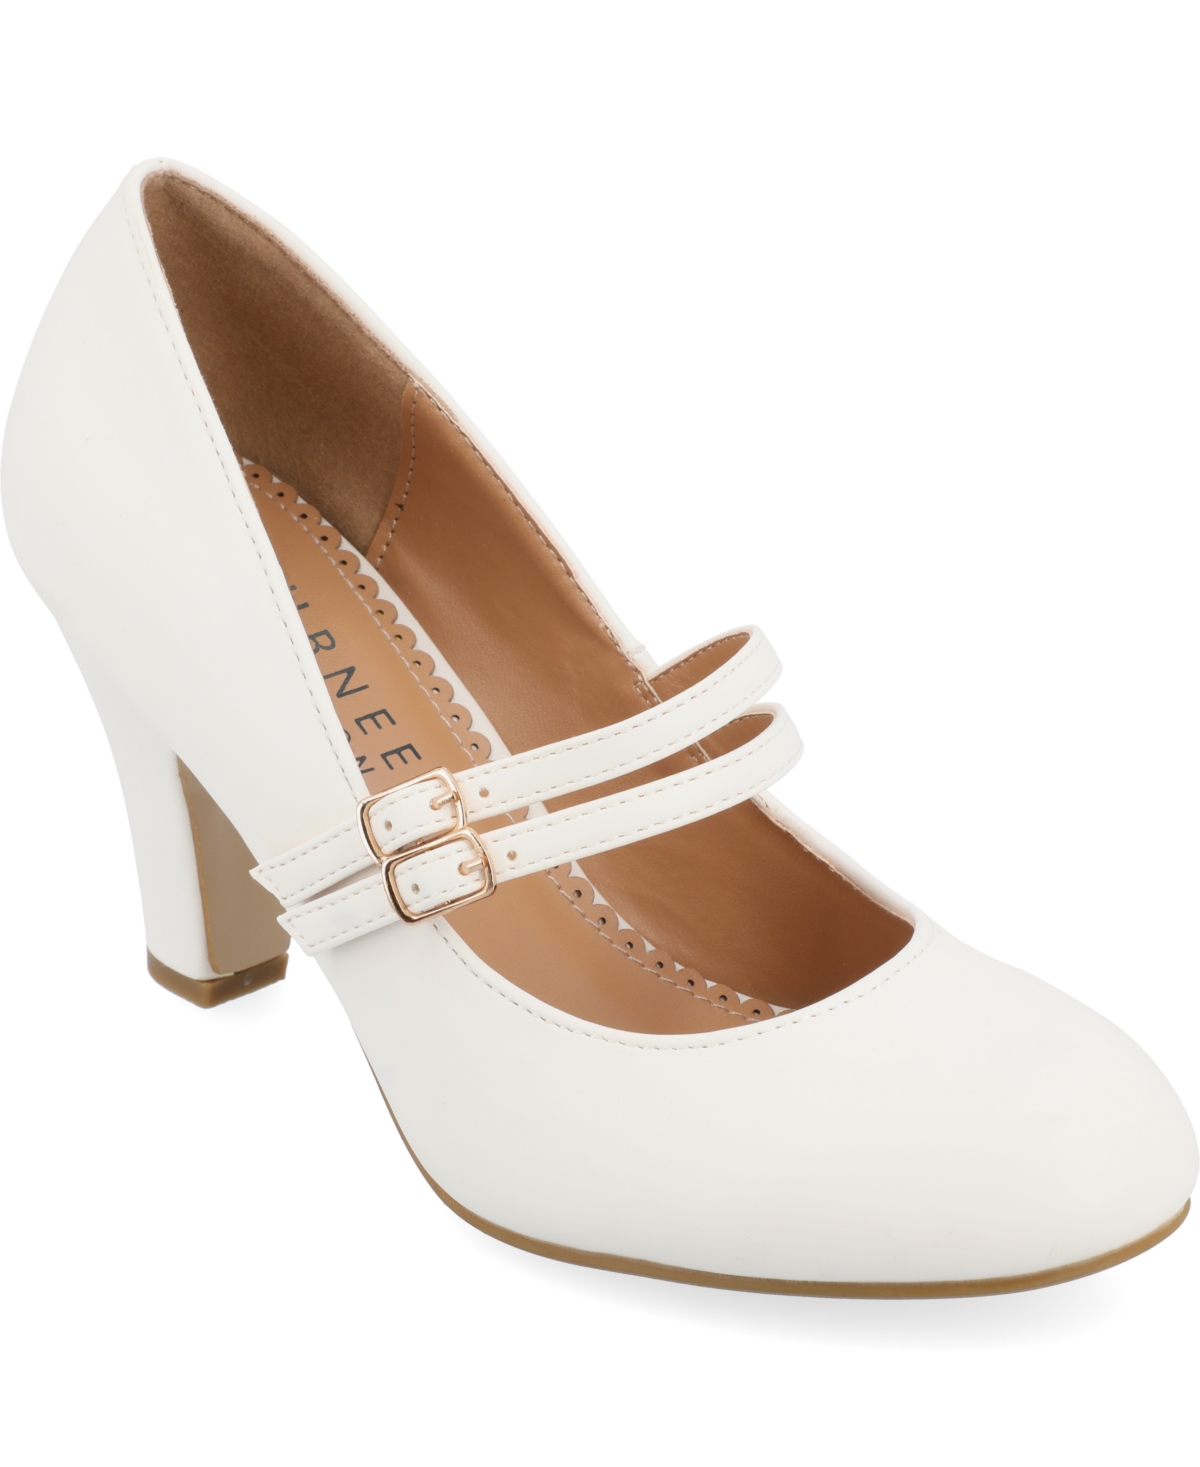 Women's Windy Double Strap Mary Jane Pumps - White